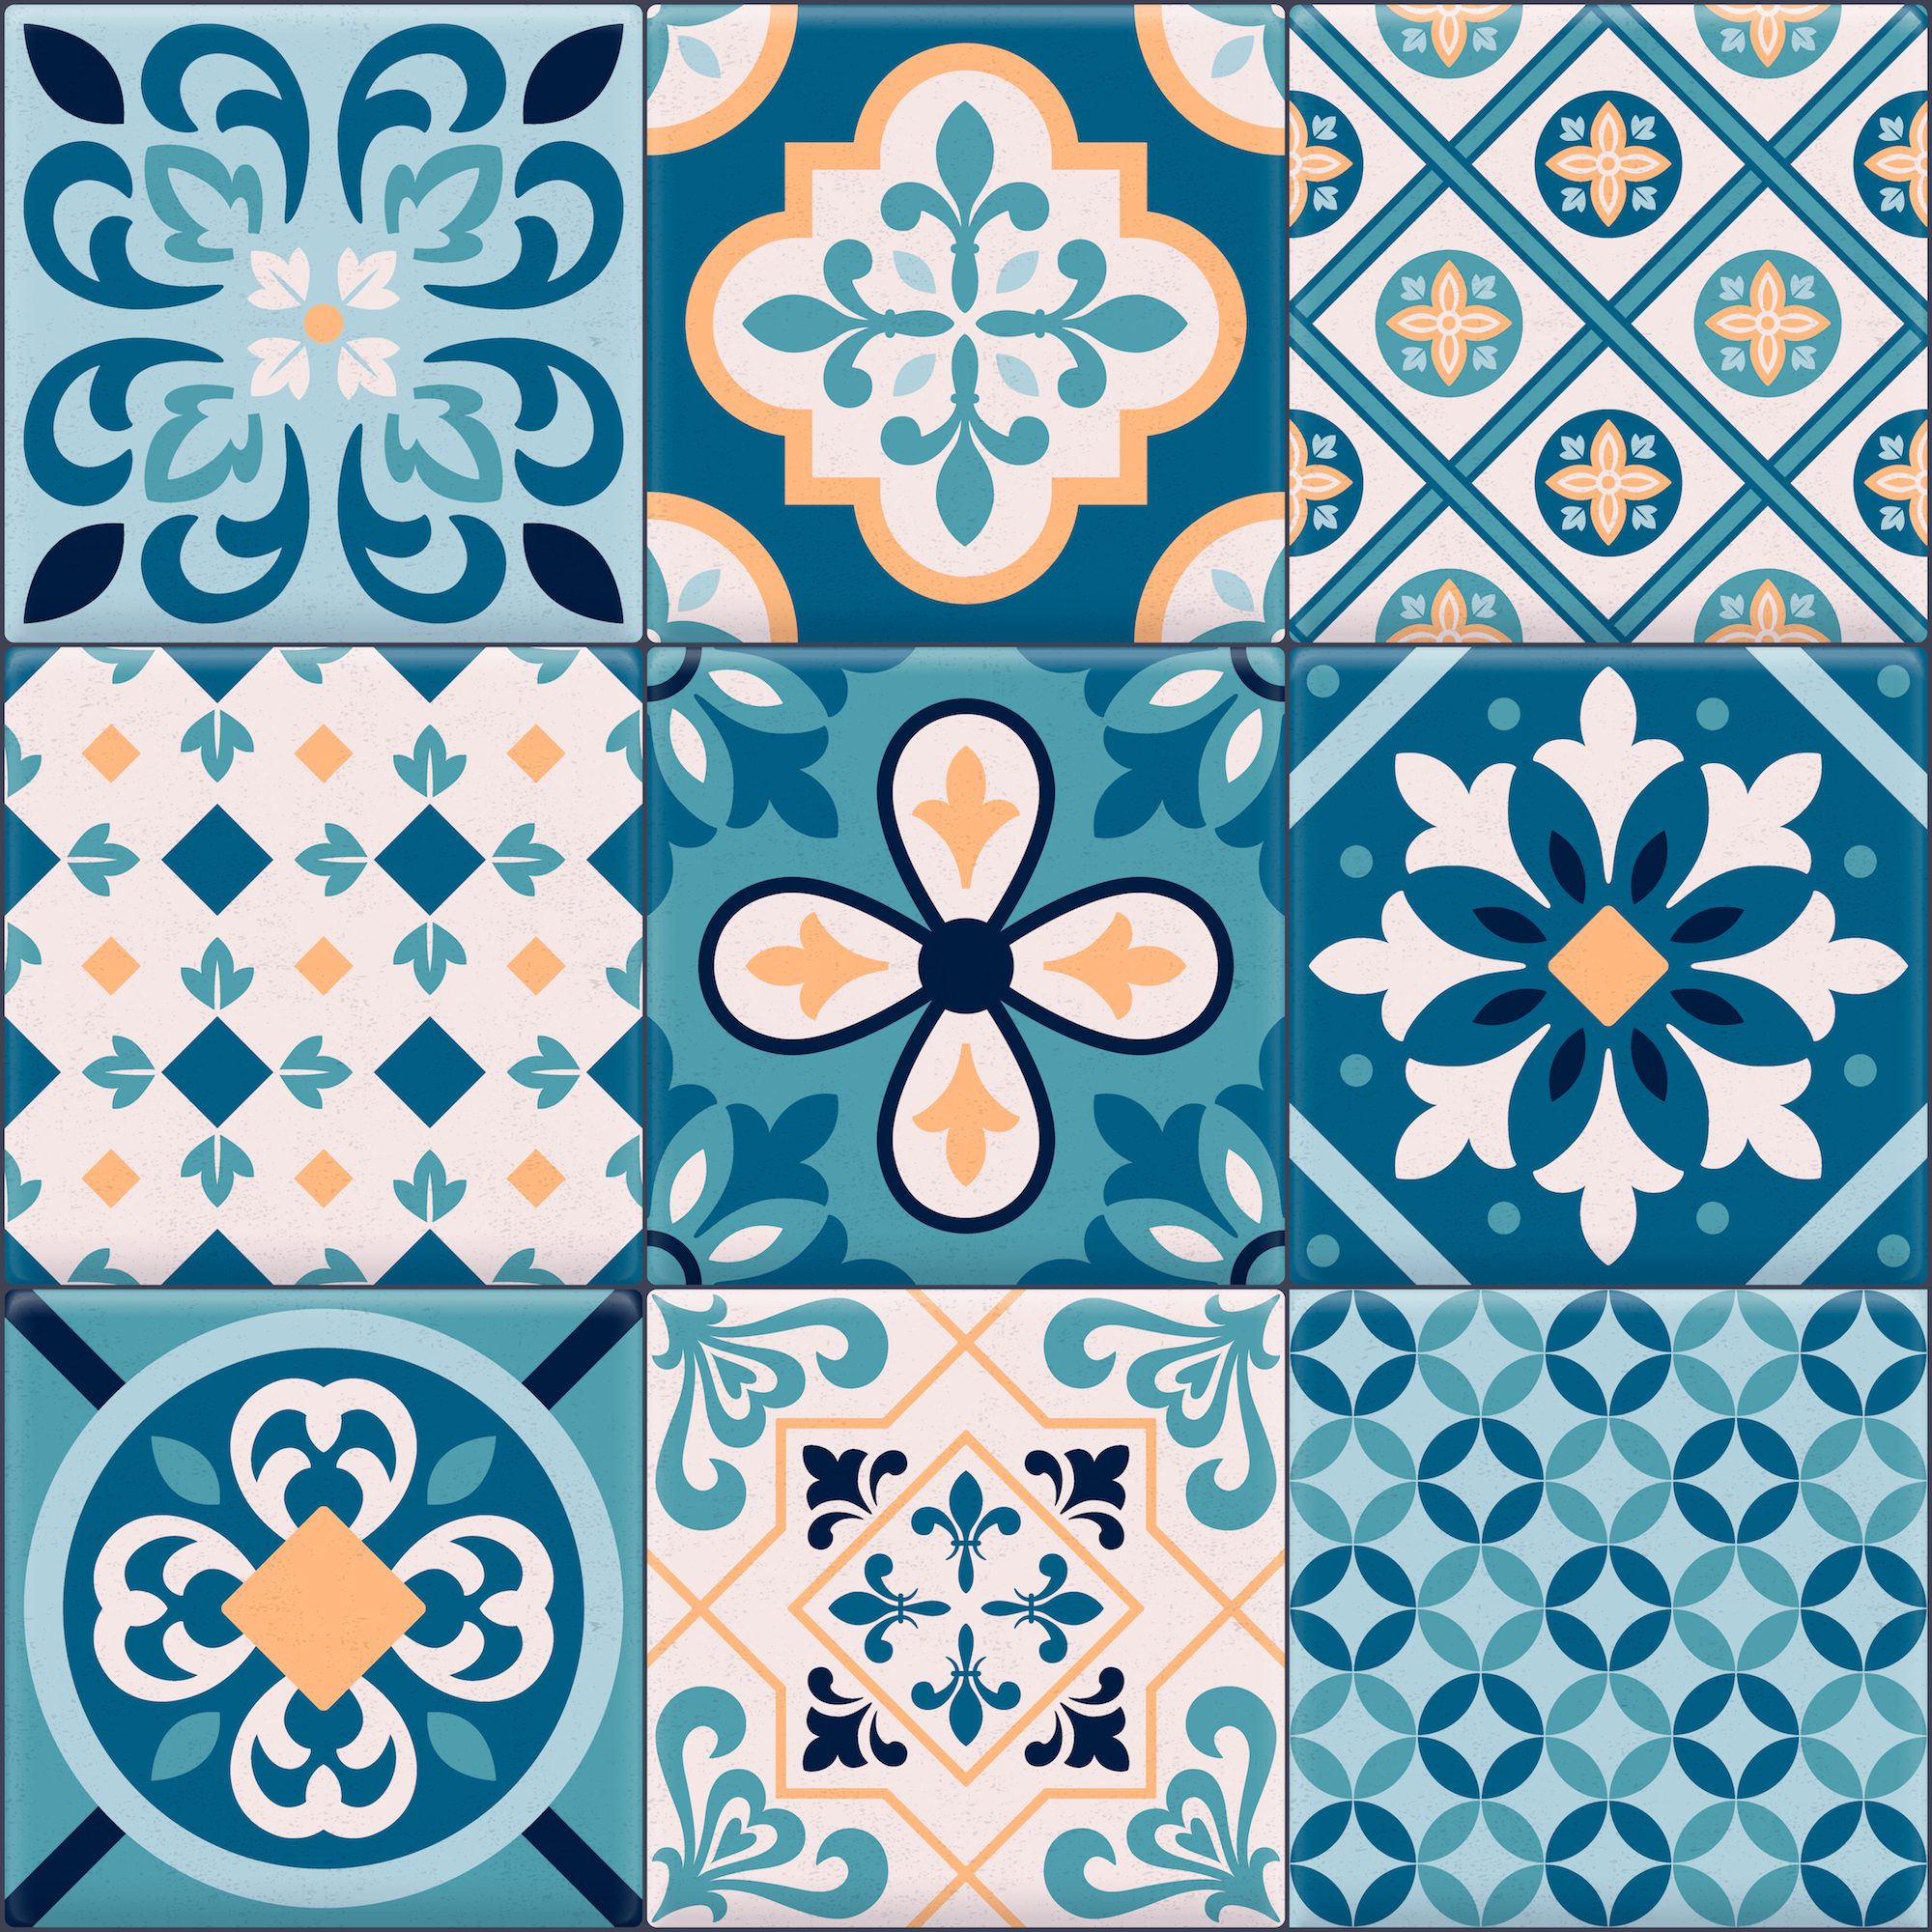 Colored and realistic ceramic floor tiles ornaments icon set for creation of different pattern vector illustration